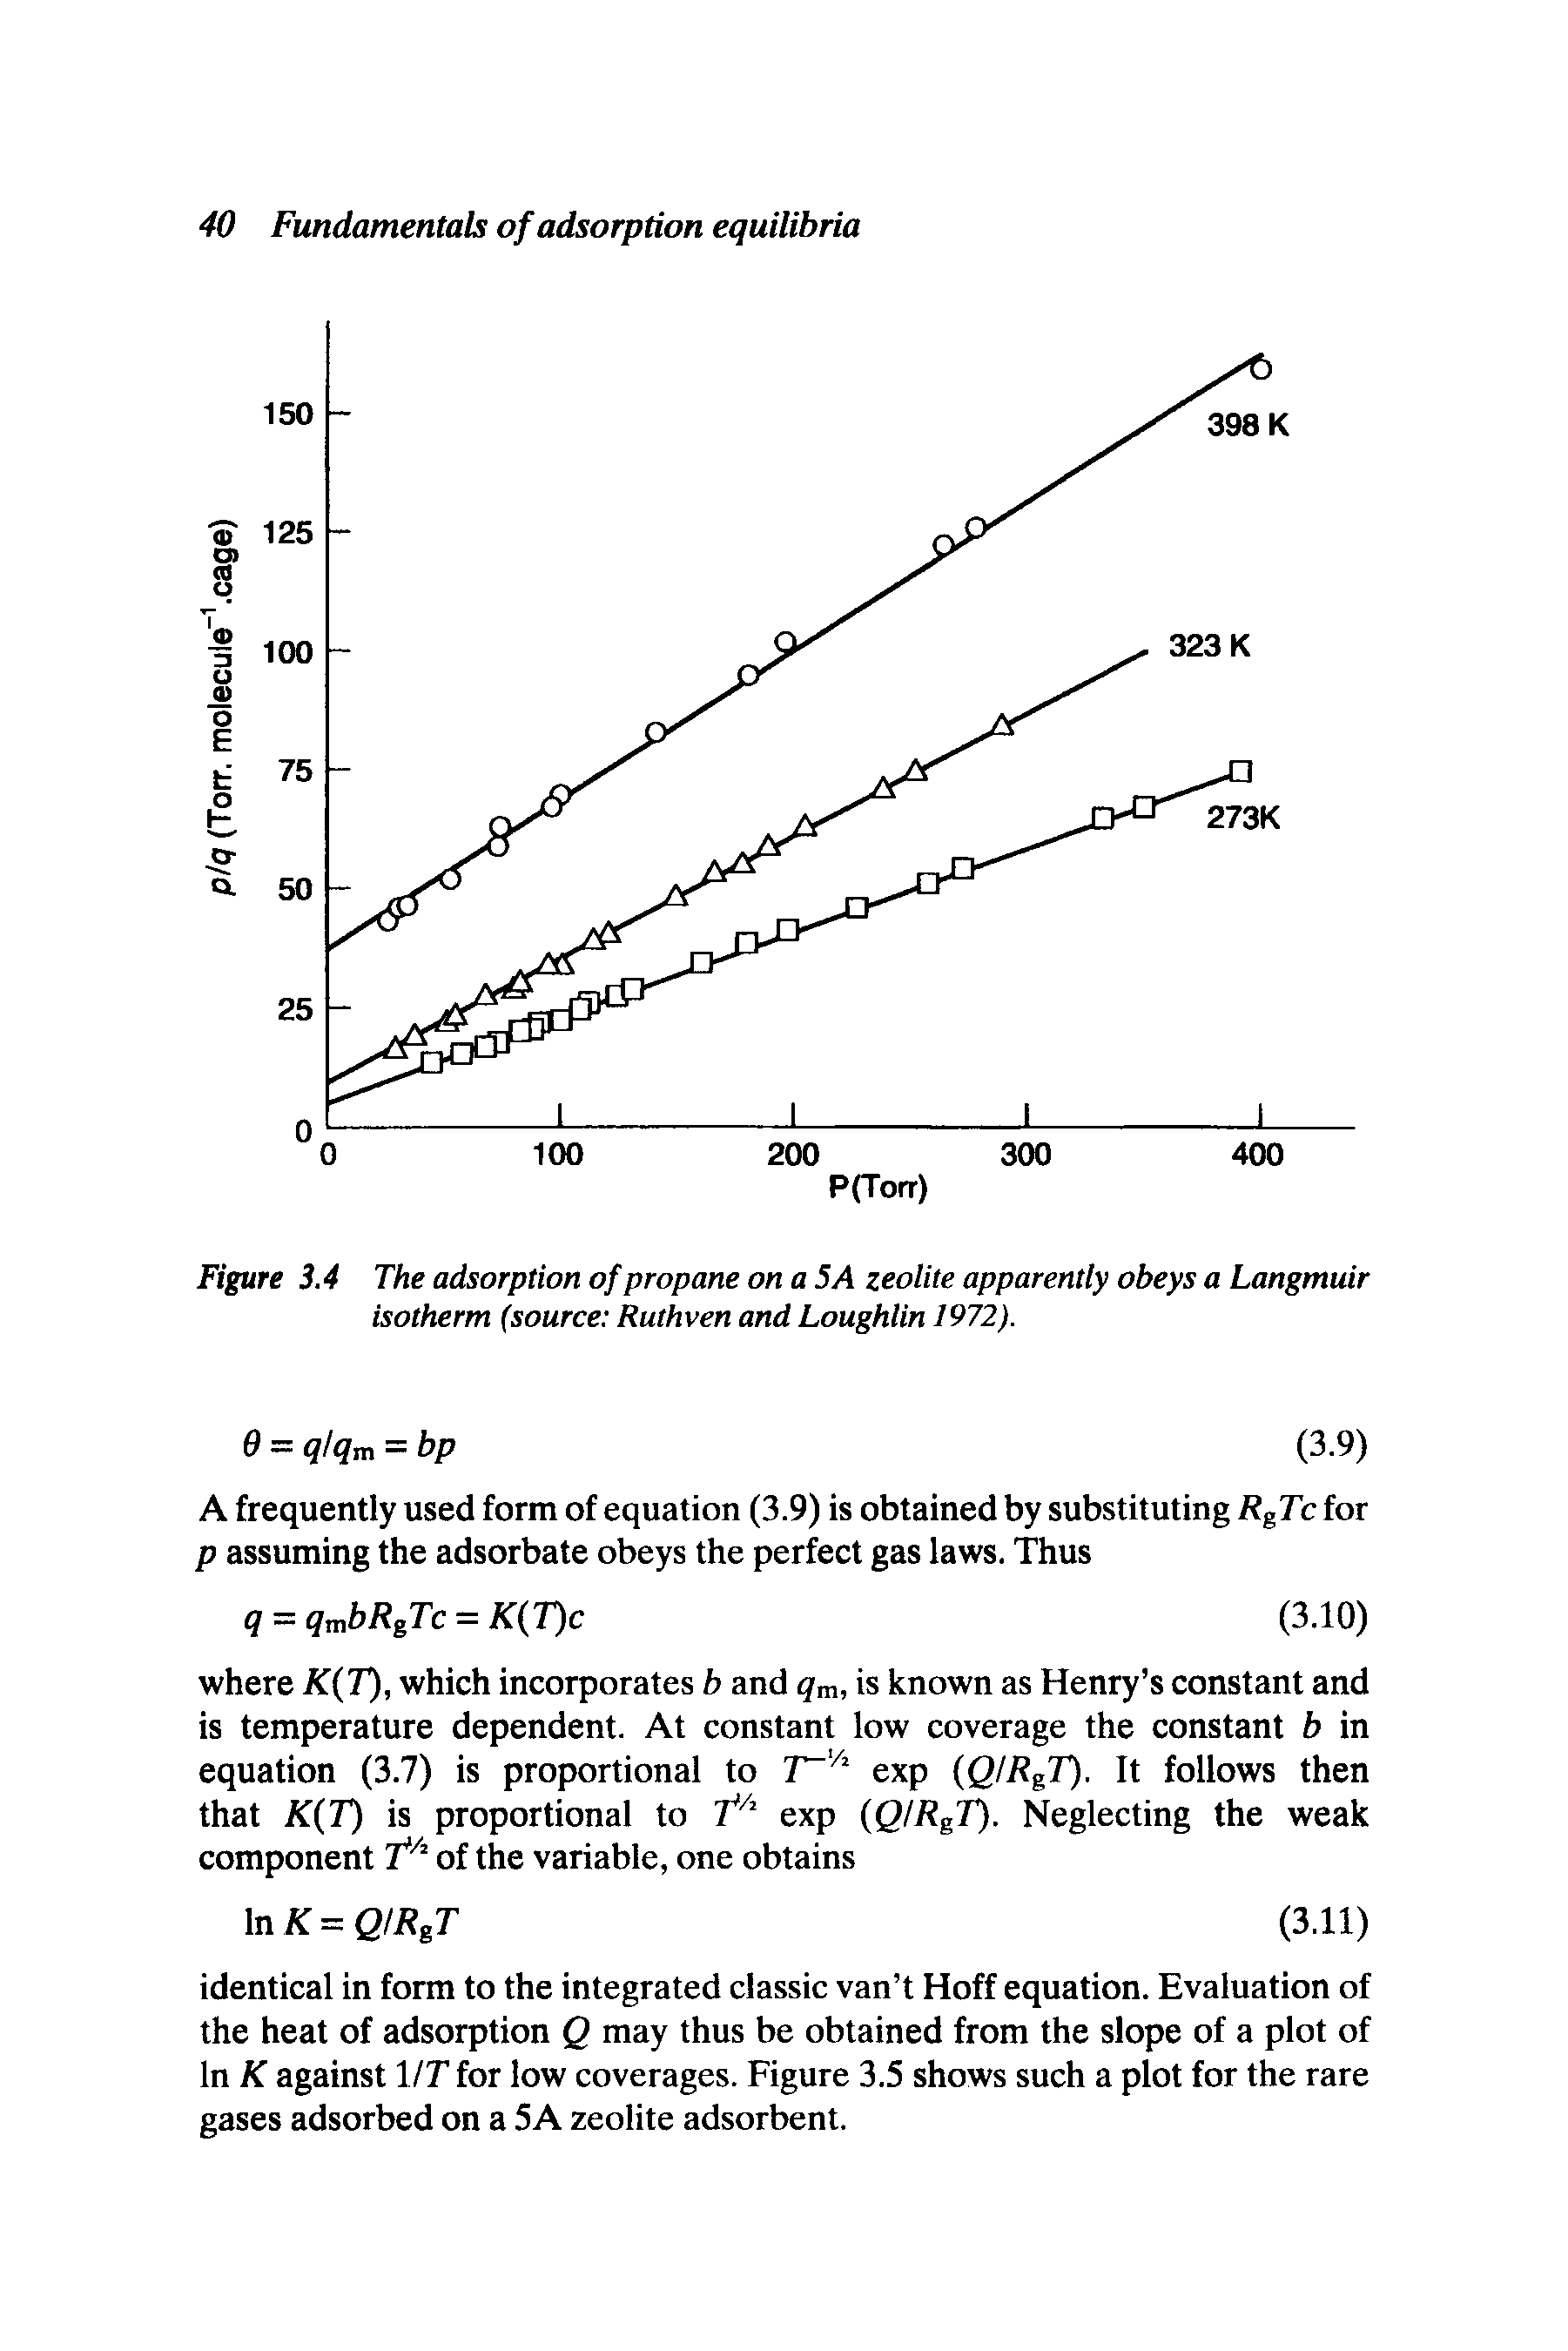 Figure 3.4 The adsorption of propane on a 5i4 zeolite apparently obeys a Langmuir isotherm (source Ruthven and Loughlin 1972).